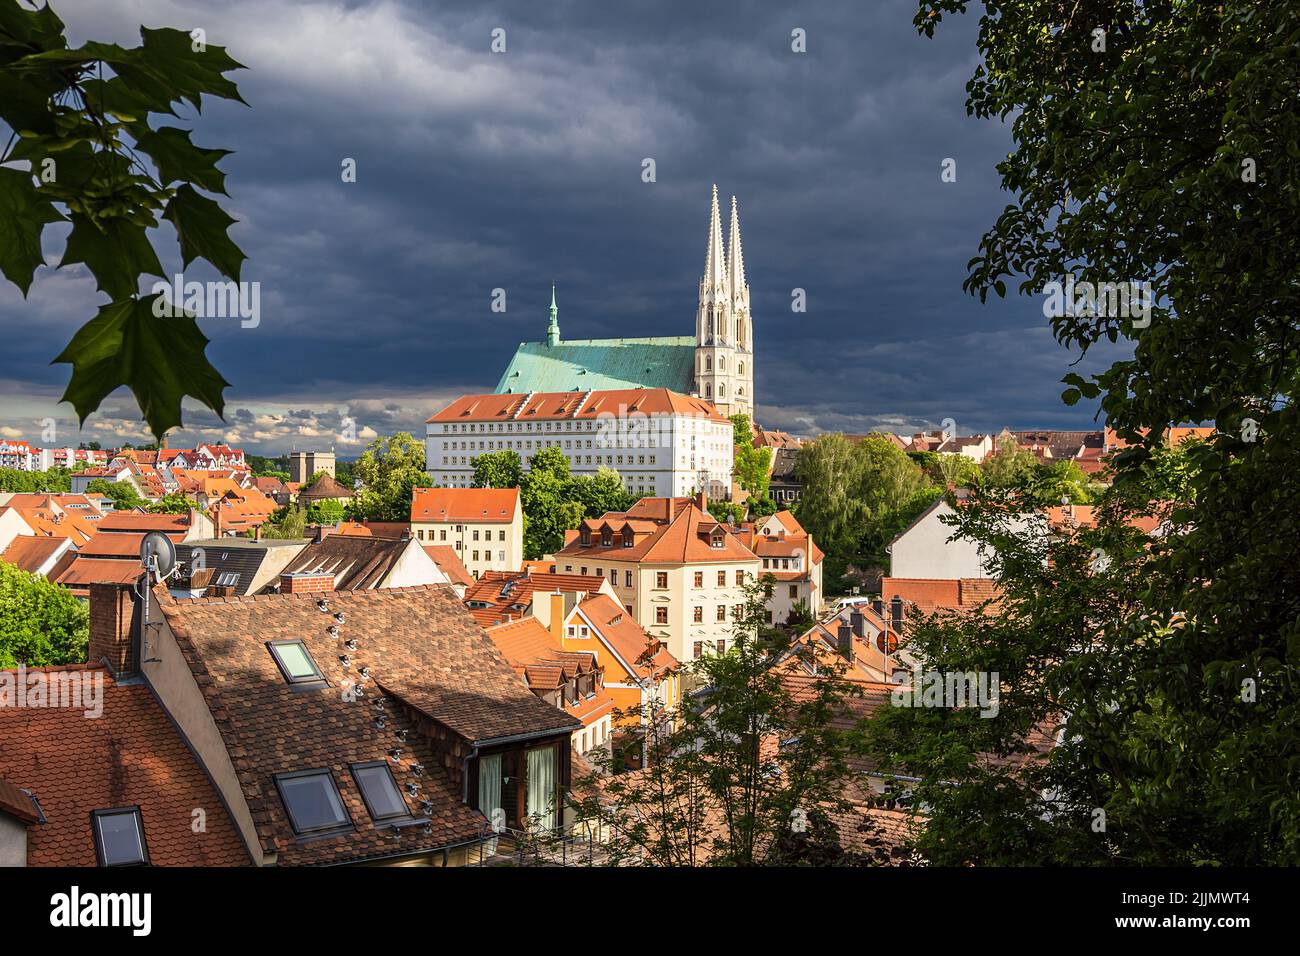 View to the church Peterskirche in Goerlitz, Germany. Stock Photo